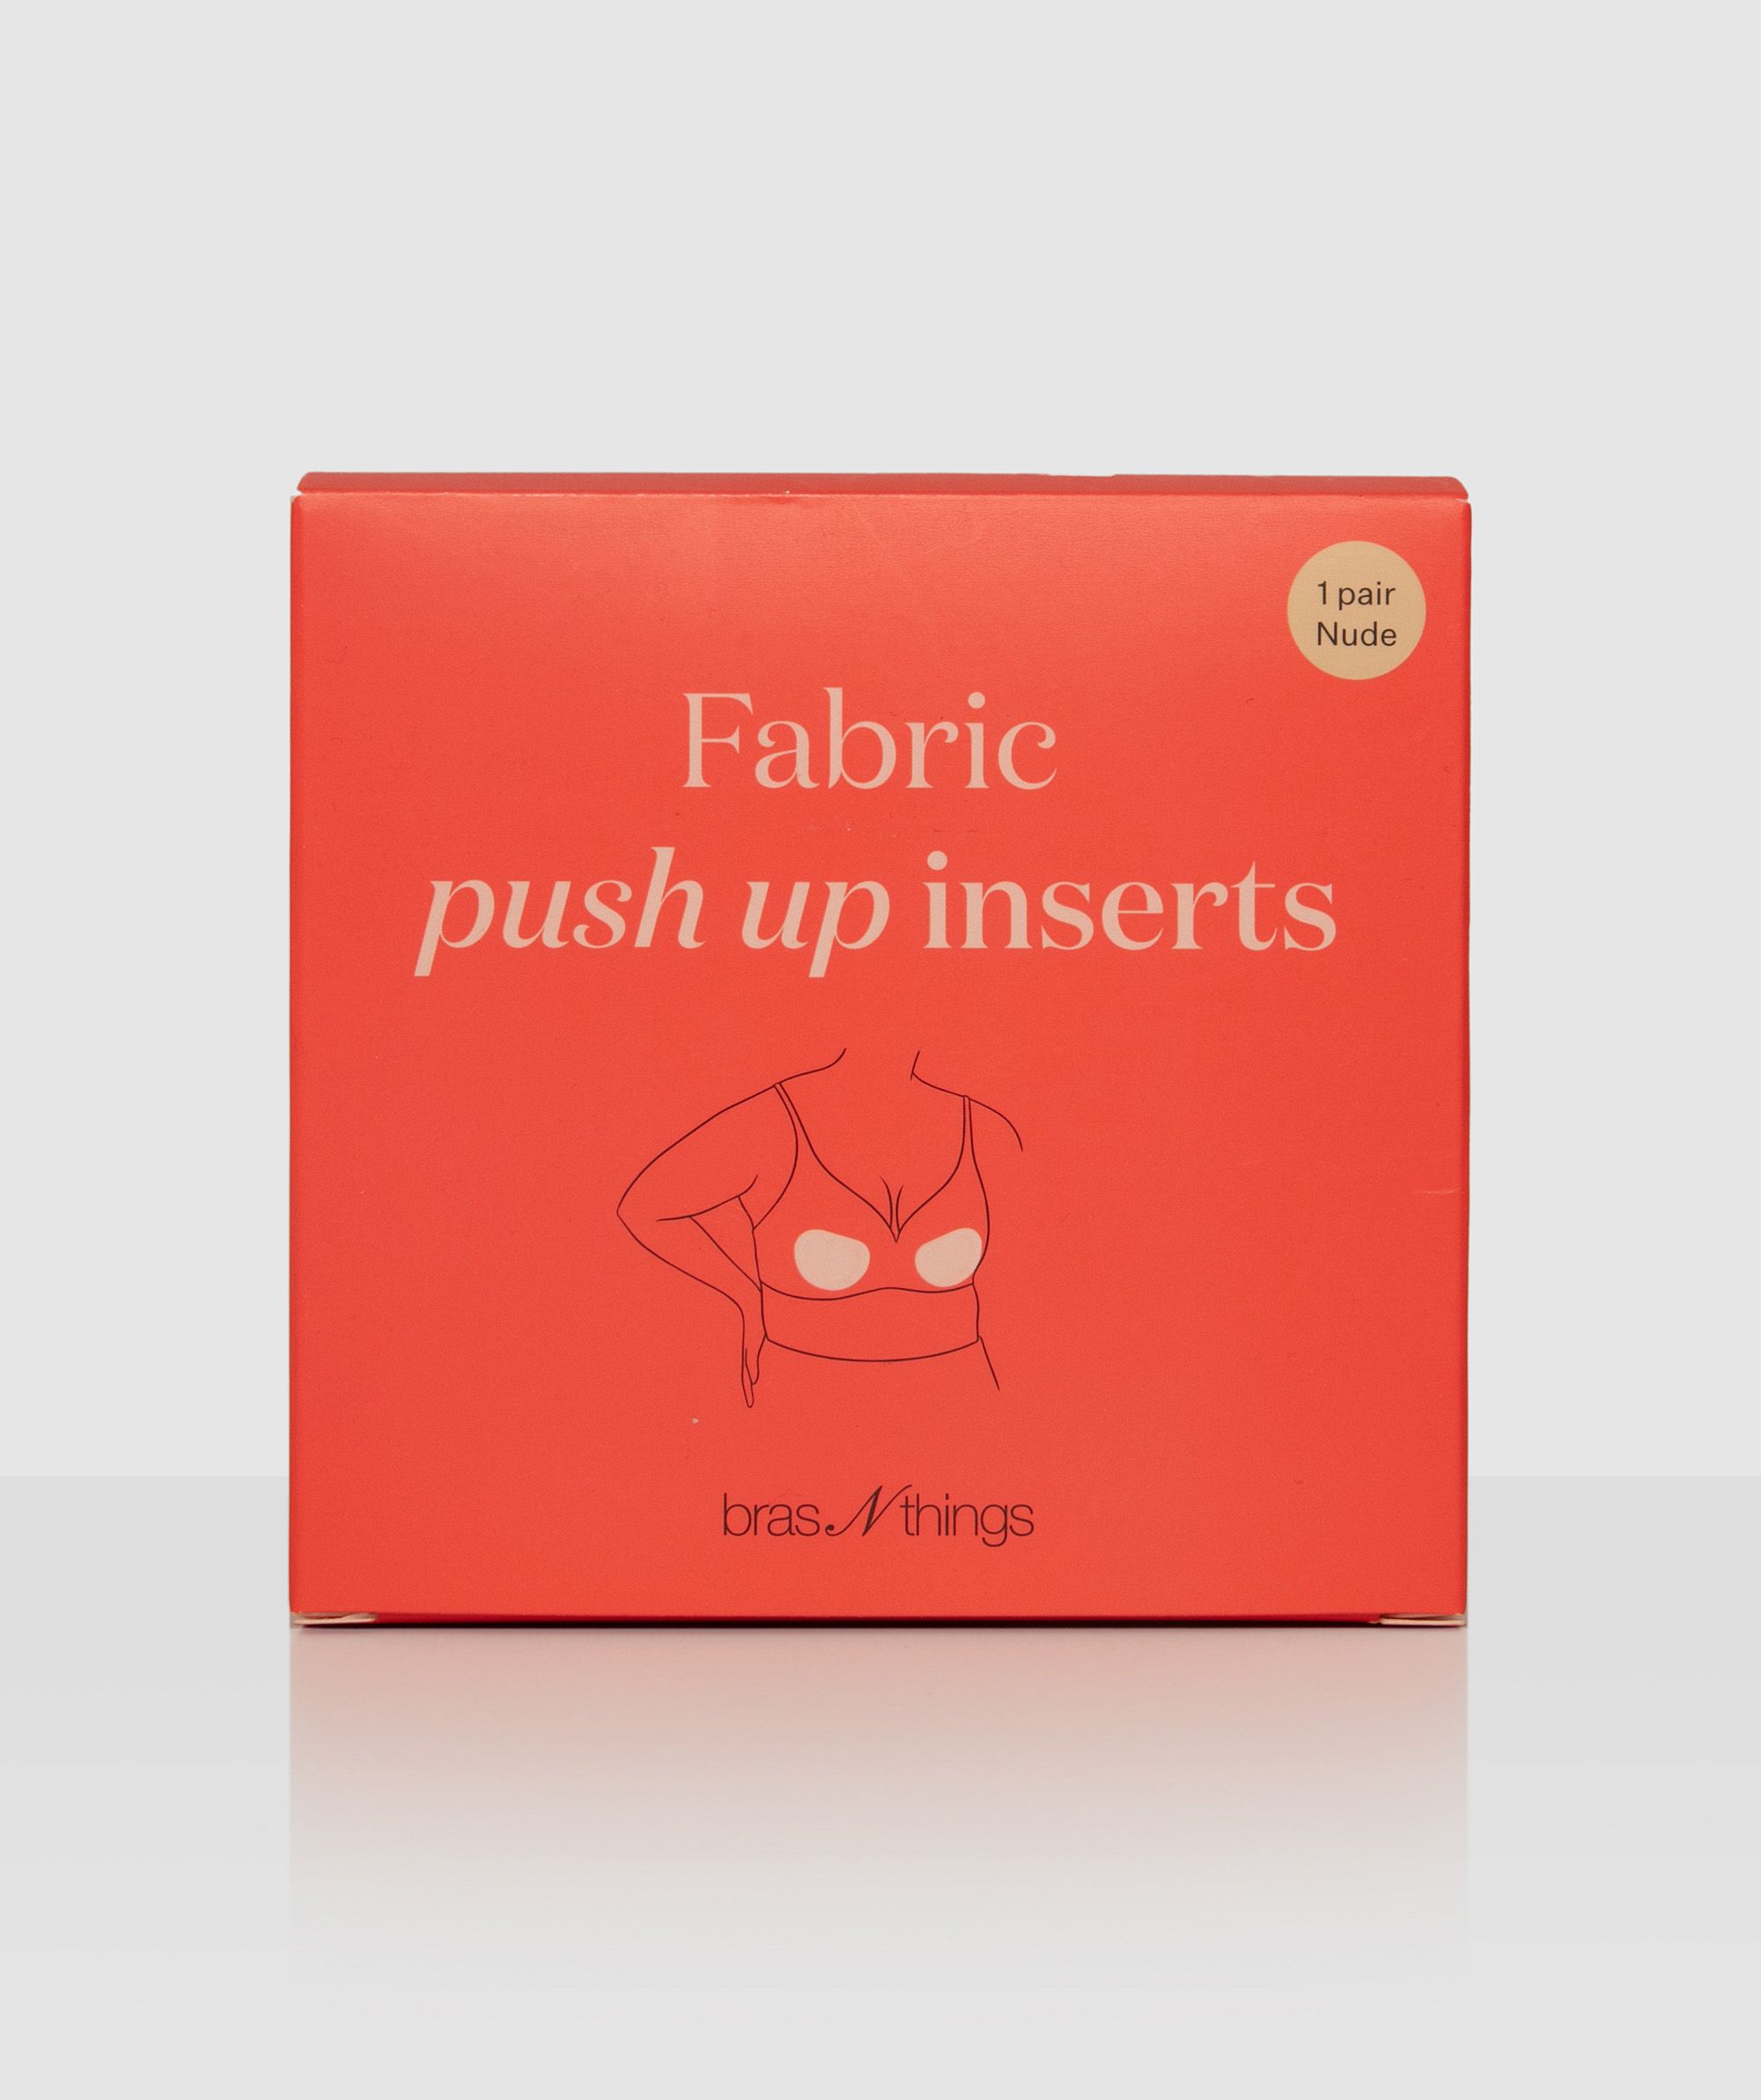 Adhesive Push Up Cleavage Booster Pads